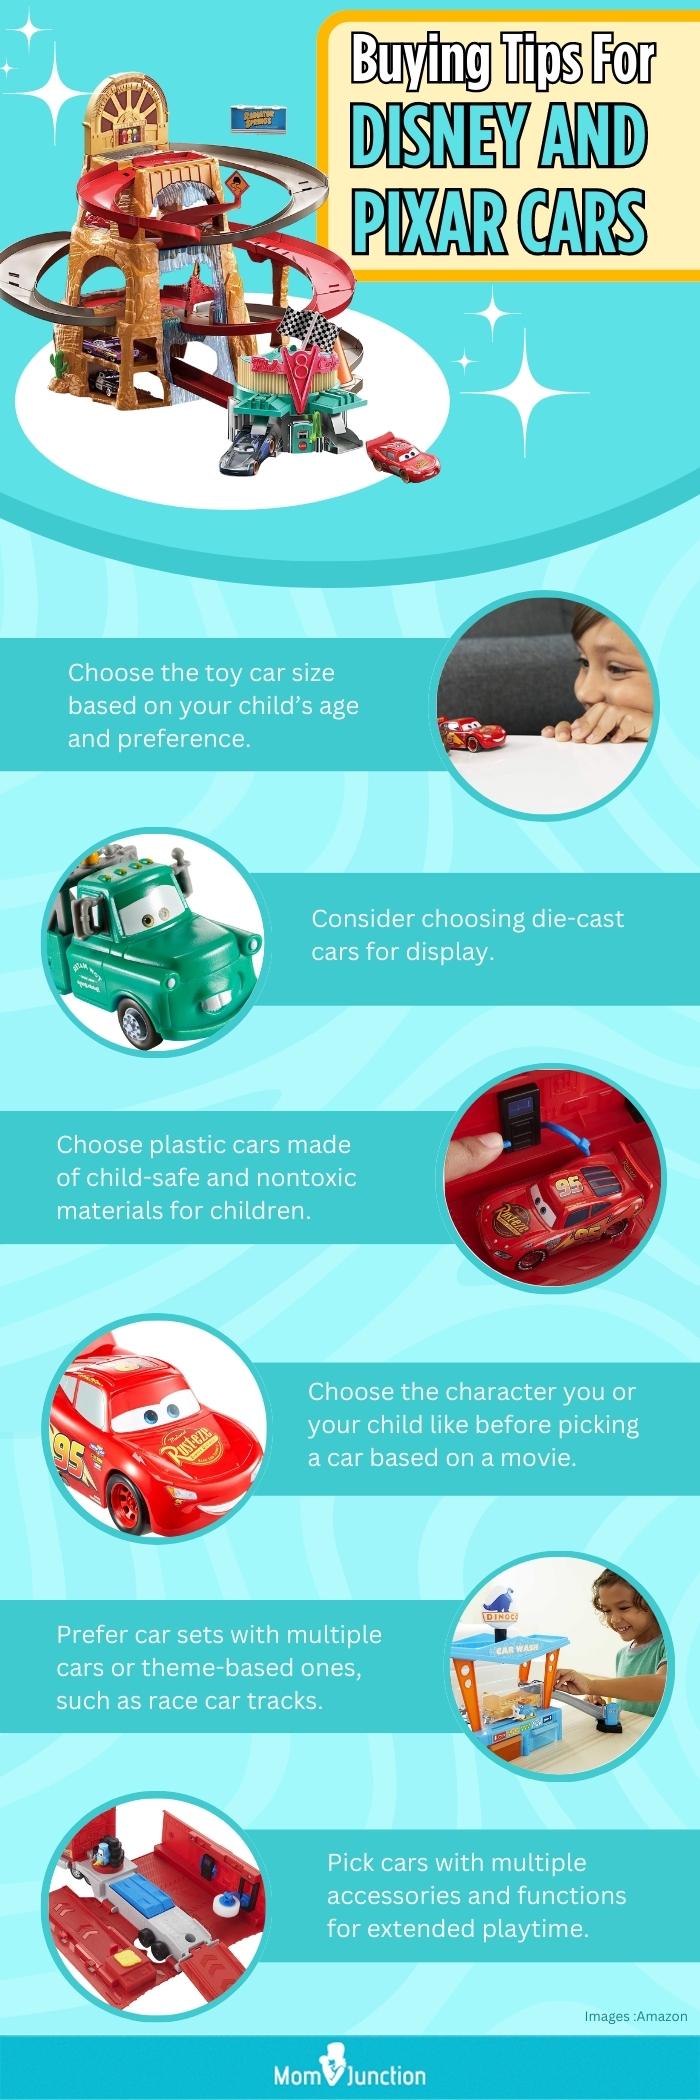 Buying Tips For Disney And Pixar Cars (infographic)